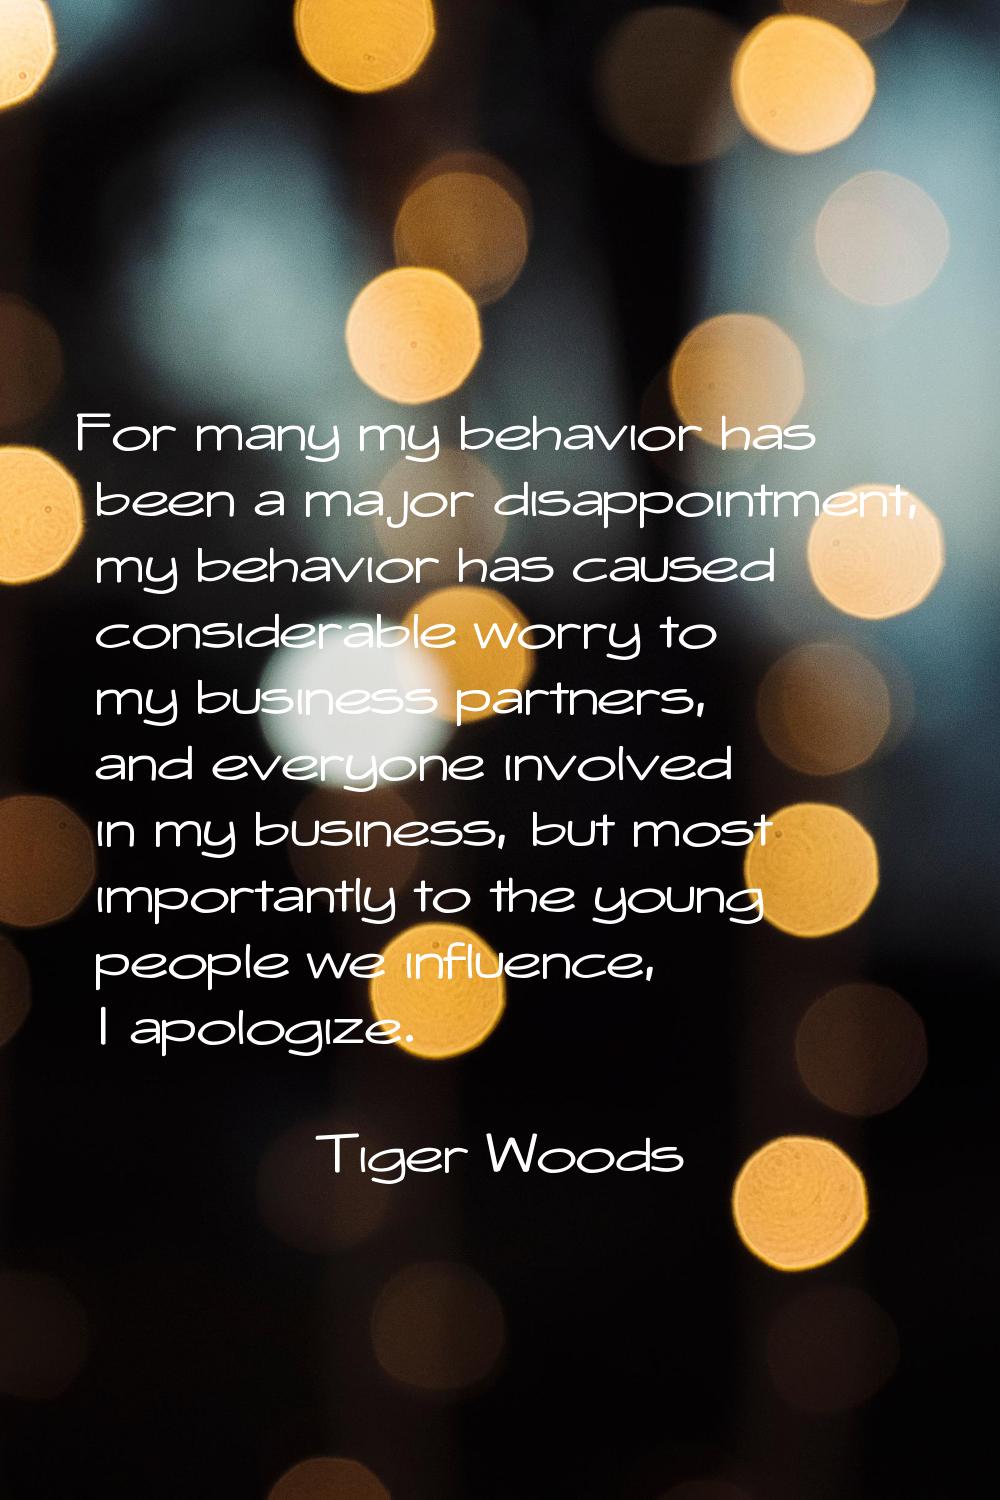 For many my behavior has been a major disappointment, my behavior has caused considerable worry to 